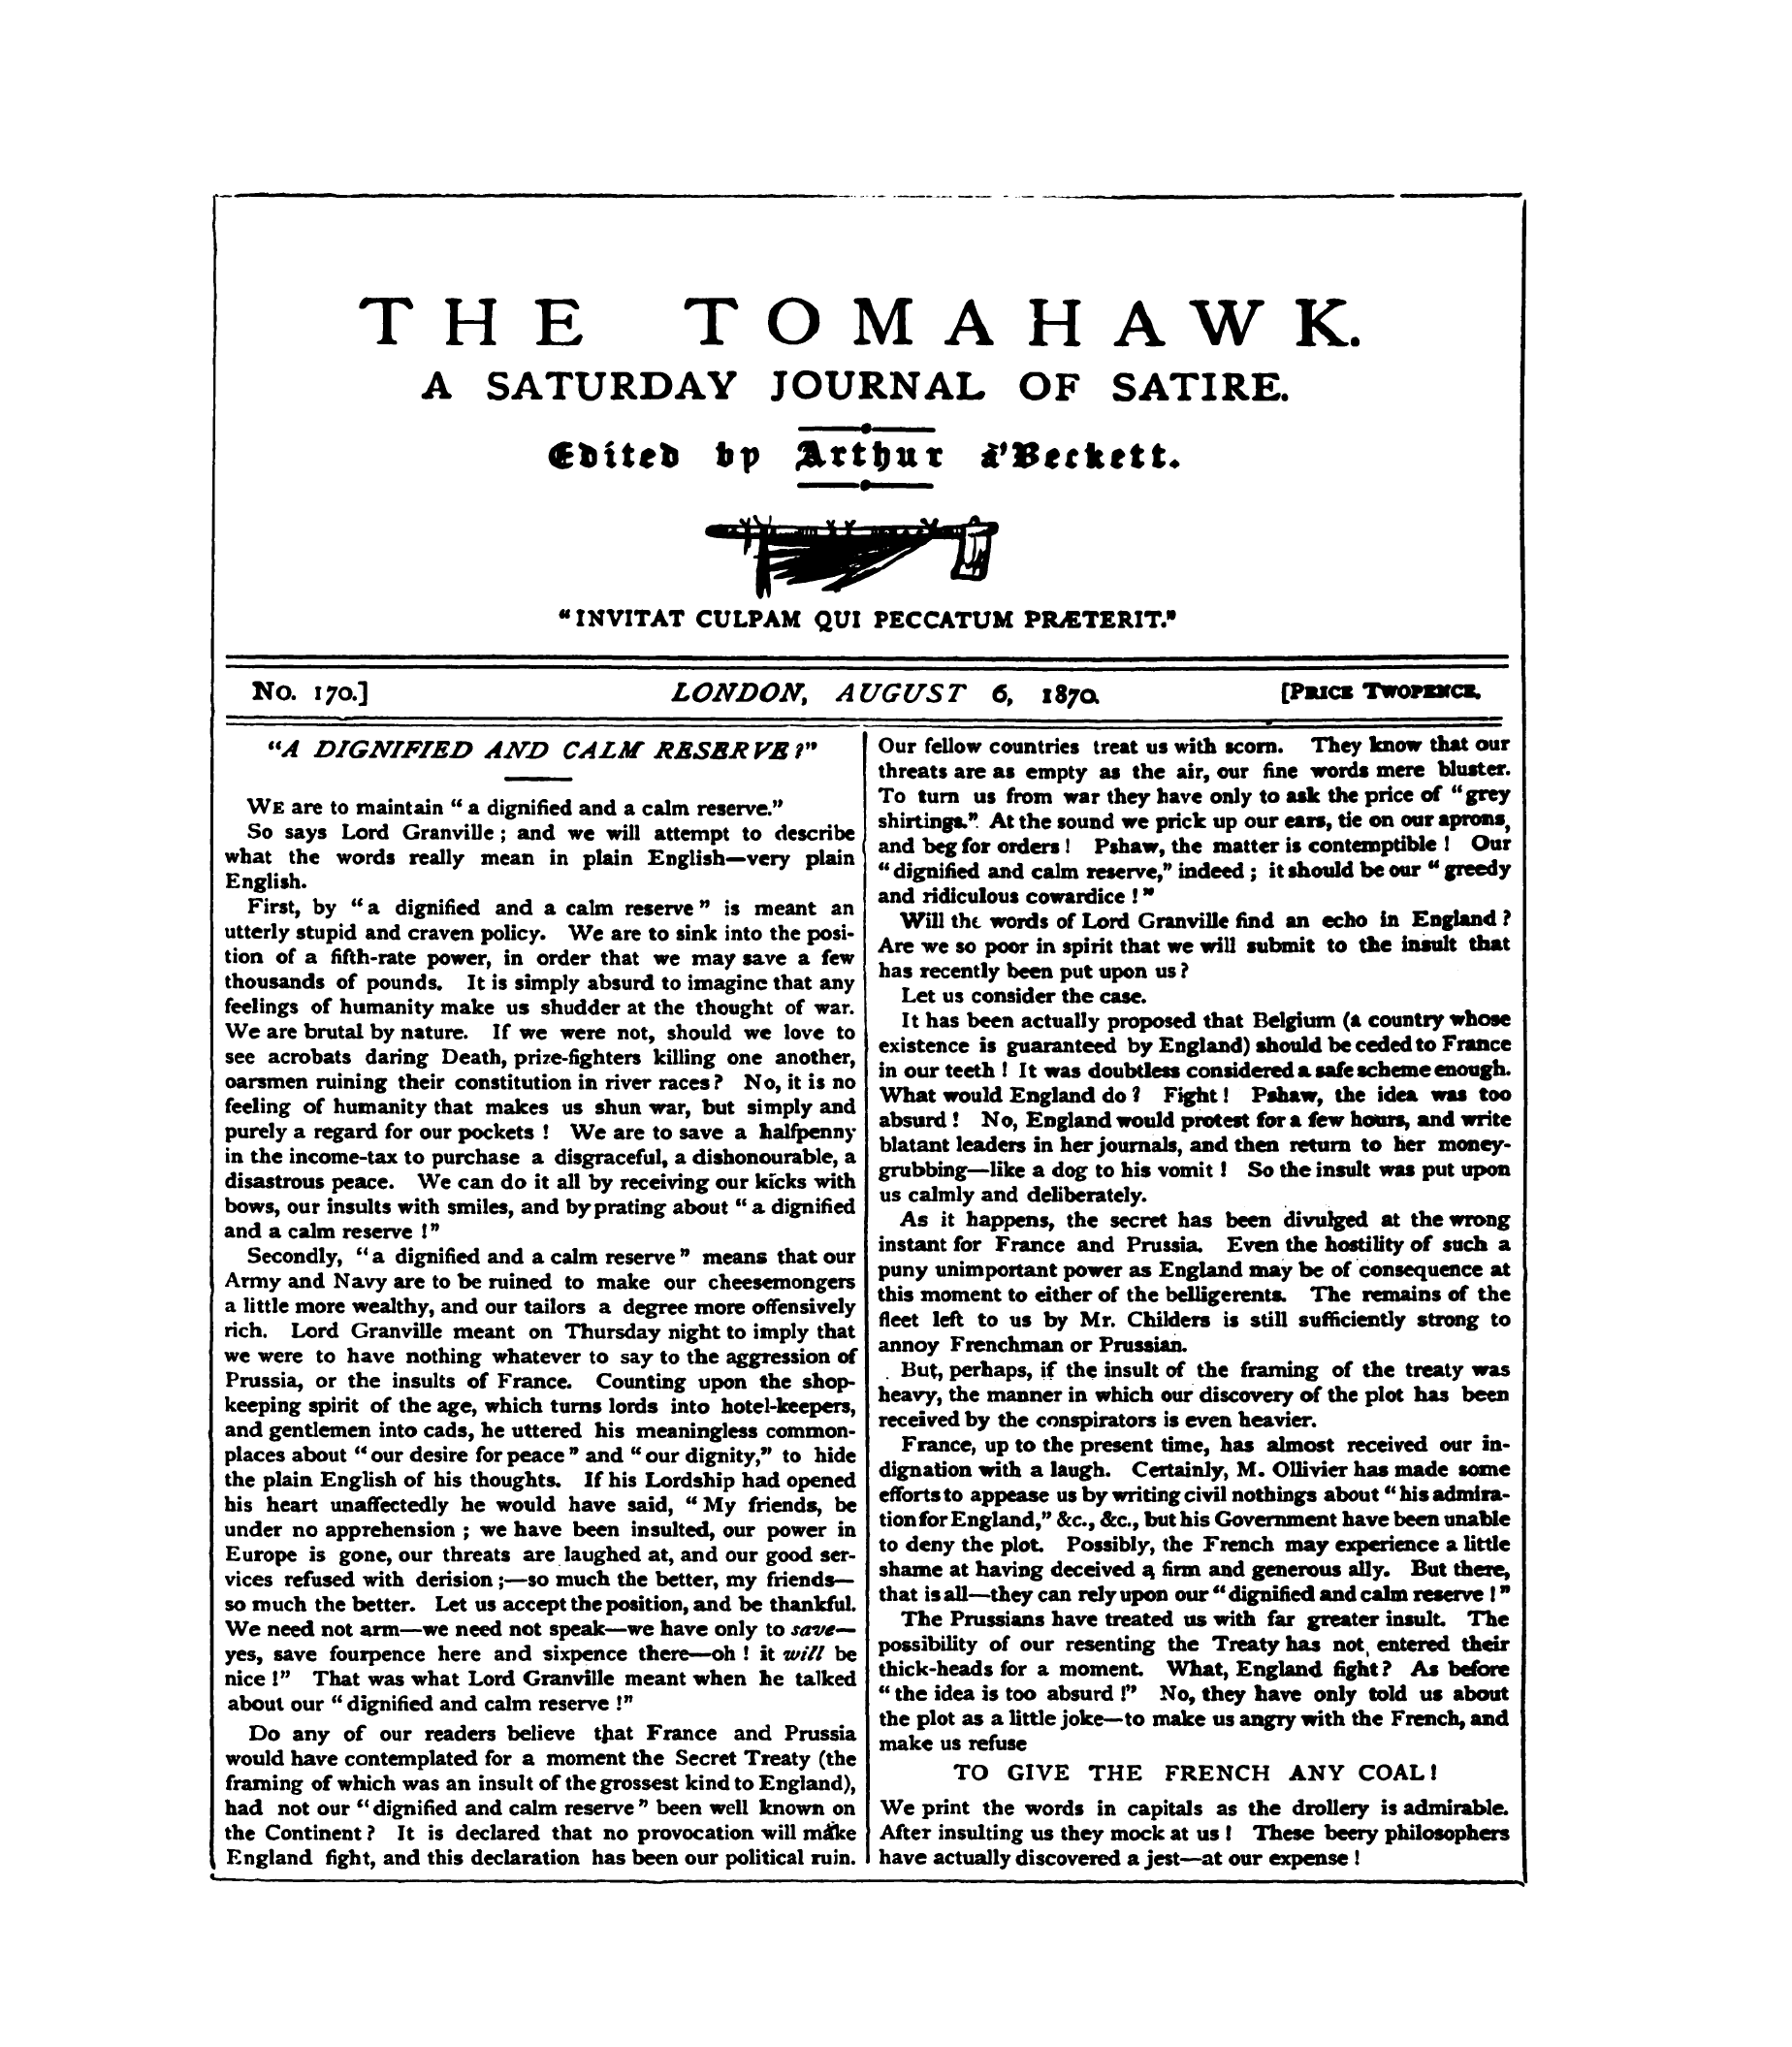 Tomahawk (1867-1870): jS F Y, 1st edition - We Are To Maintain " A Dignified And A C...